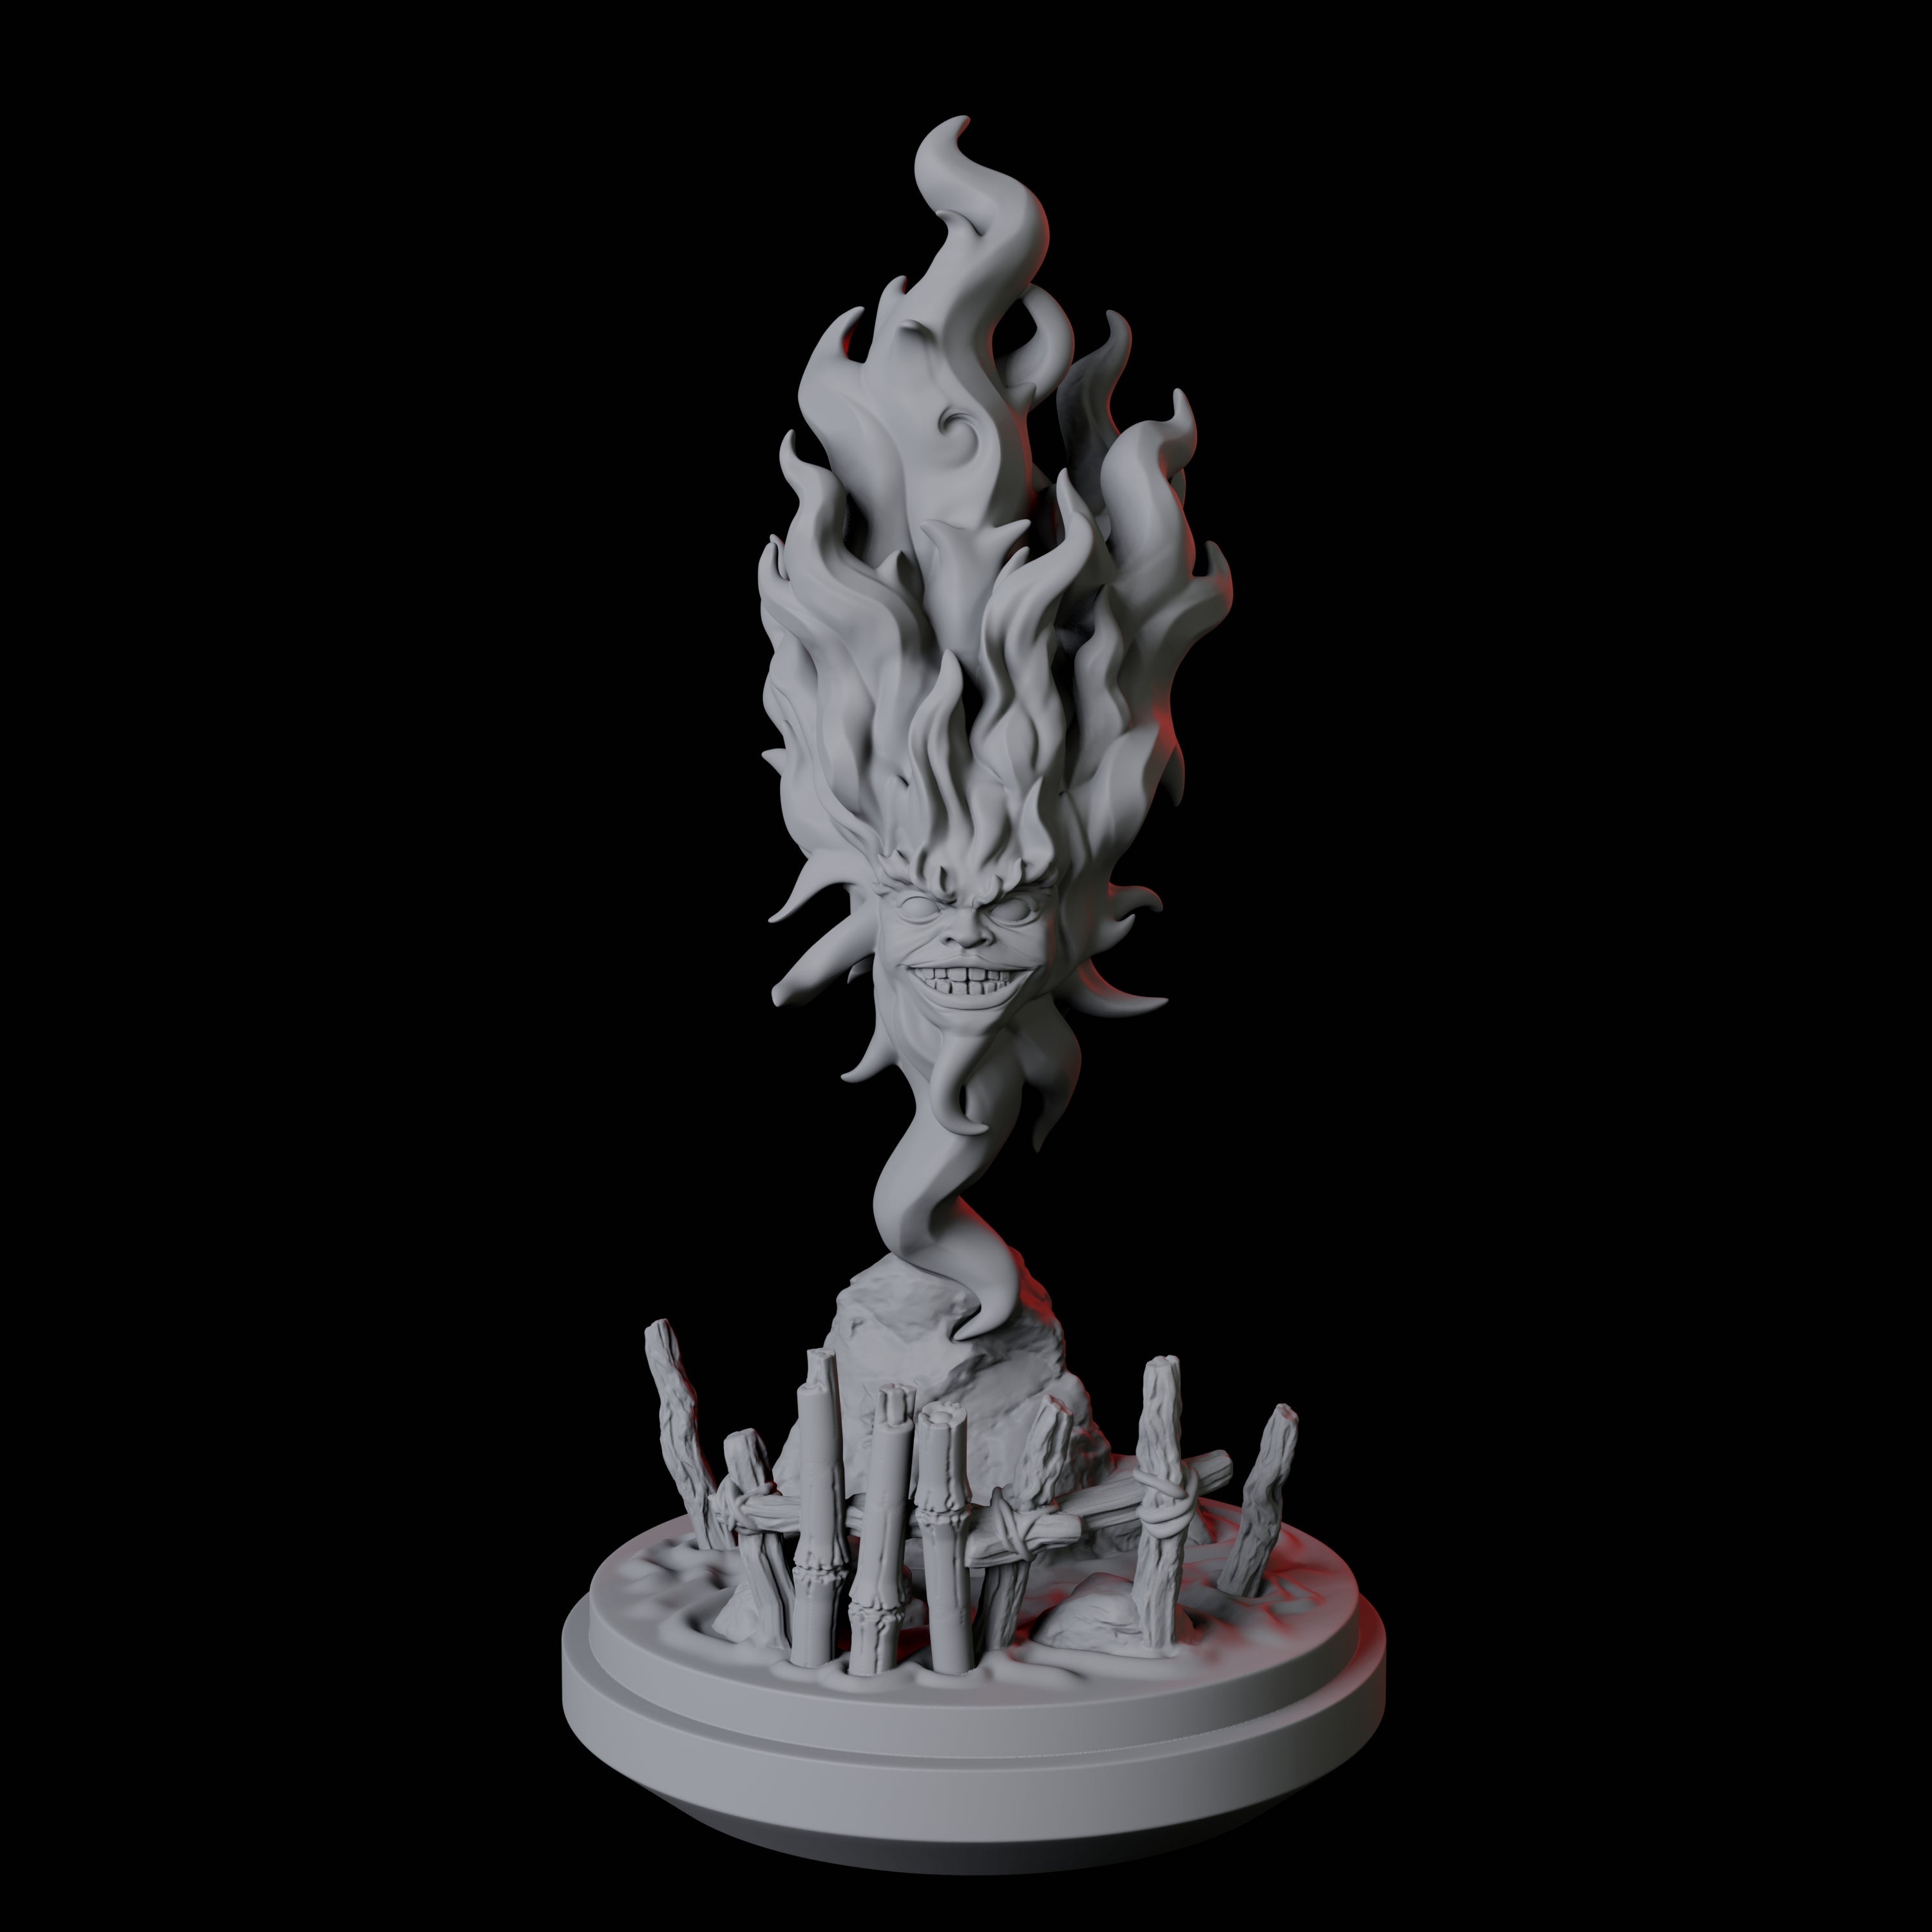 Santelmo, Flameskull Miniature for Dungeons and Dragons, Pathfinder or other TTRPGs